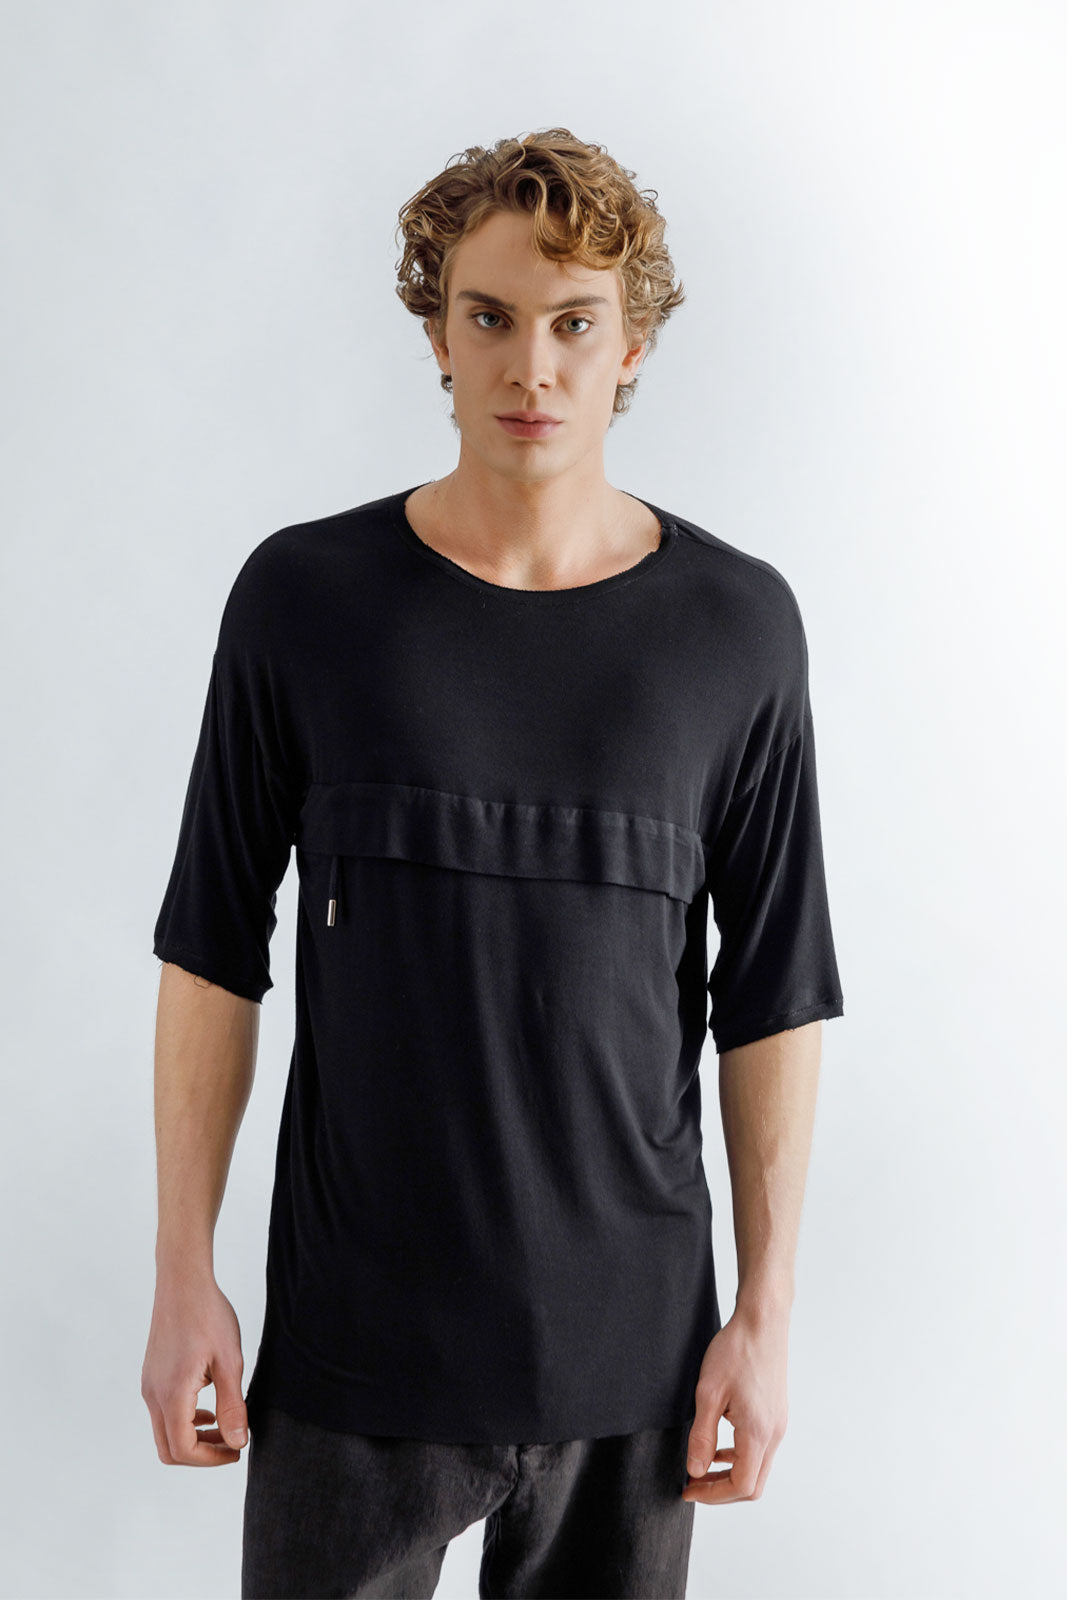 Cotton Brushed T-shirt 3/4 Sleeves